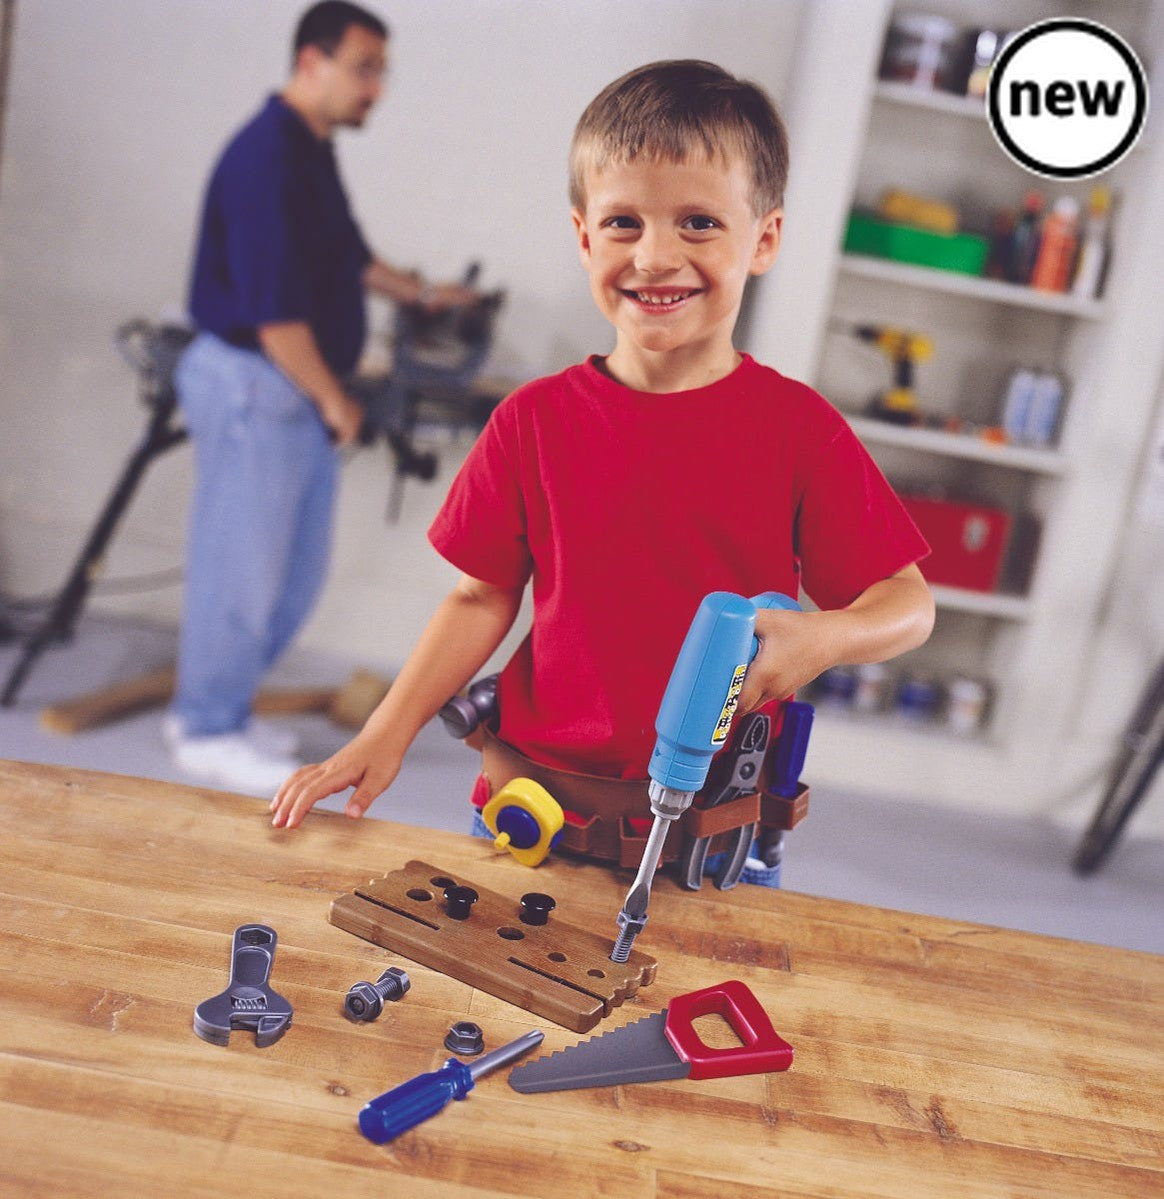 Pretend & Play Work Belt Tool Set, Get your little builder ready for a day on the job with our complete construction playset! This 20-piece set includes everything a young builder needs to tackle big construction projects or help out with home improvement tasks alongside Mom and Dad.This playset is designed to inspire imaginative play, allowing children to explore their creativity and develop important problem-solving skills. The realistic tools, such as the hammer, saw, and tape measure, will make kids fee